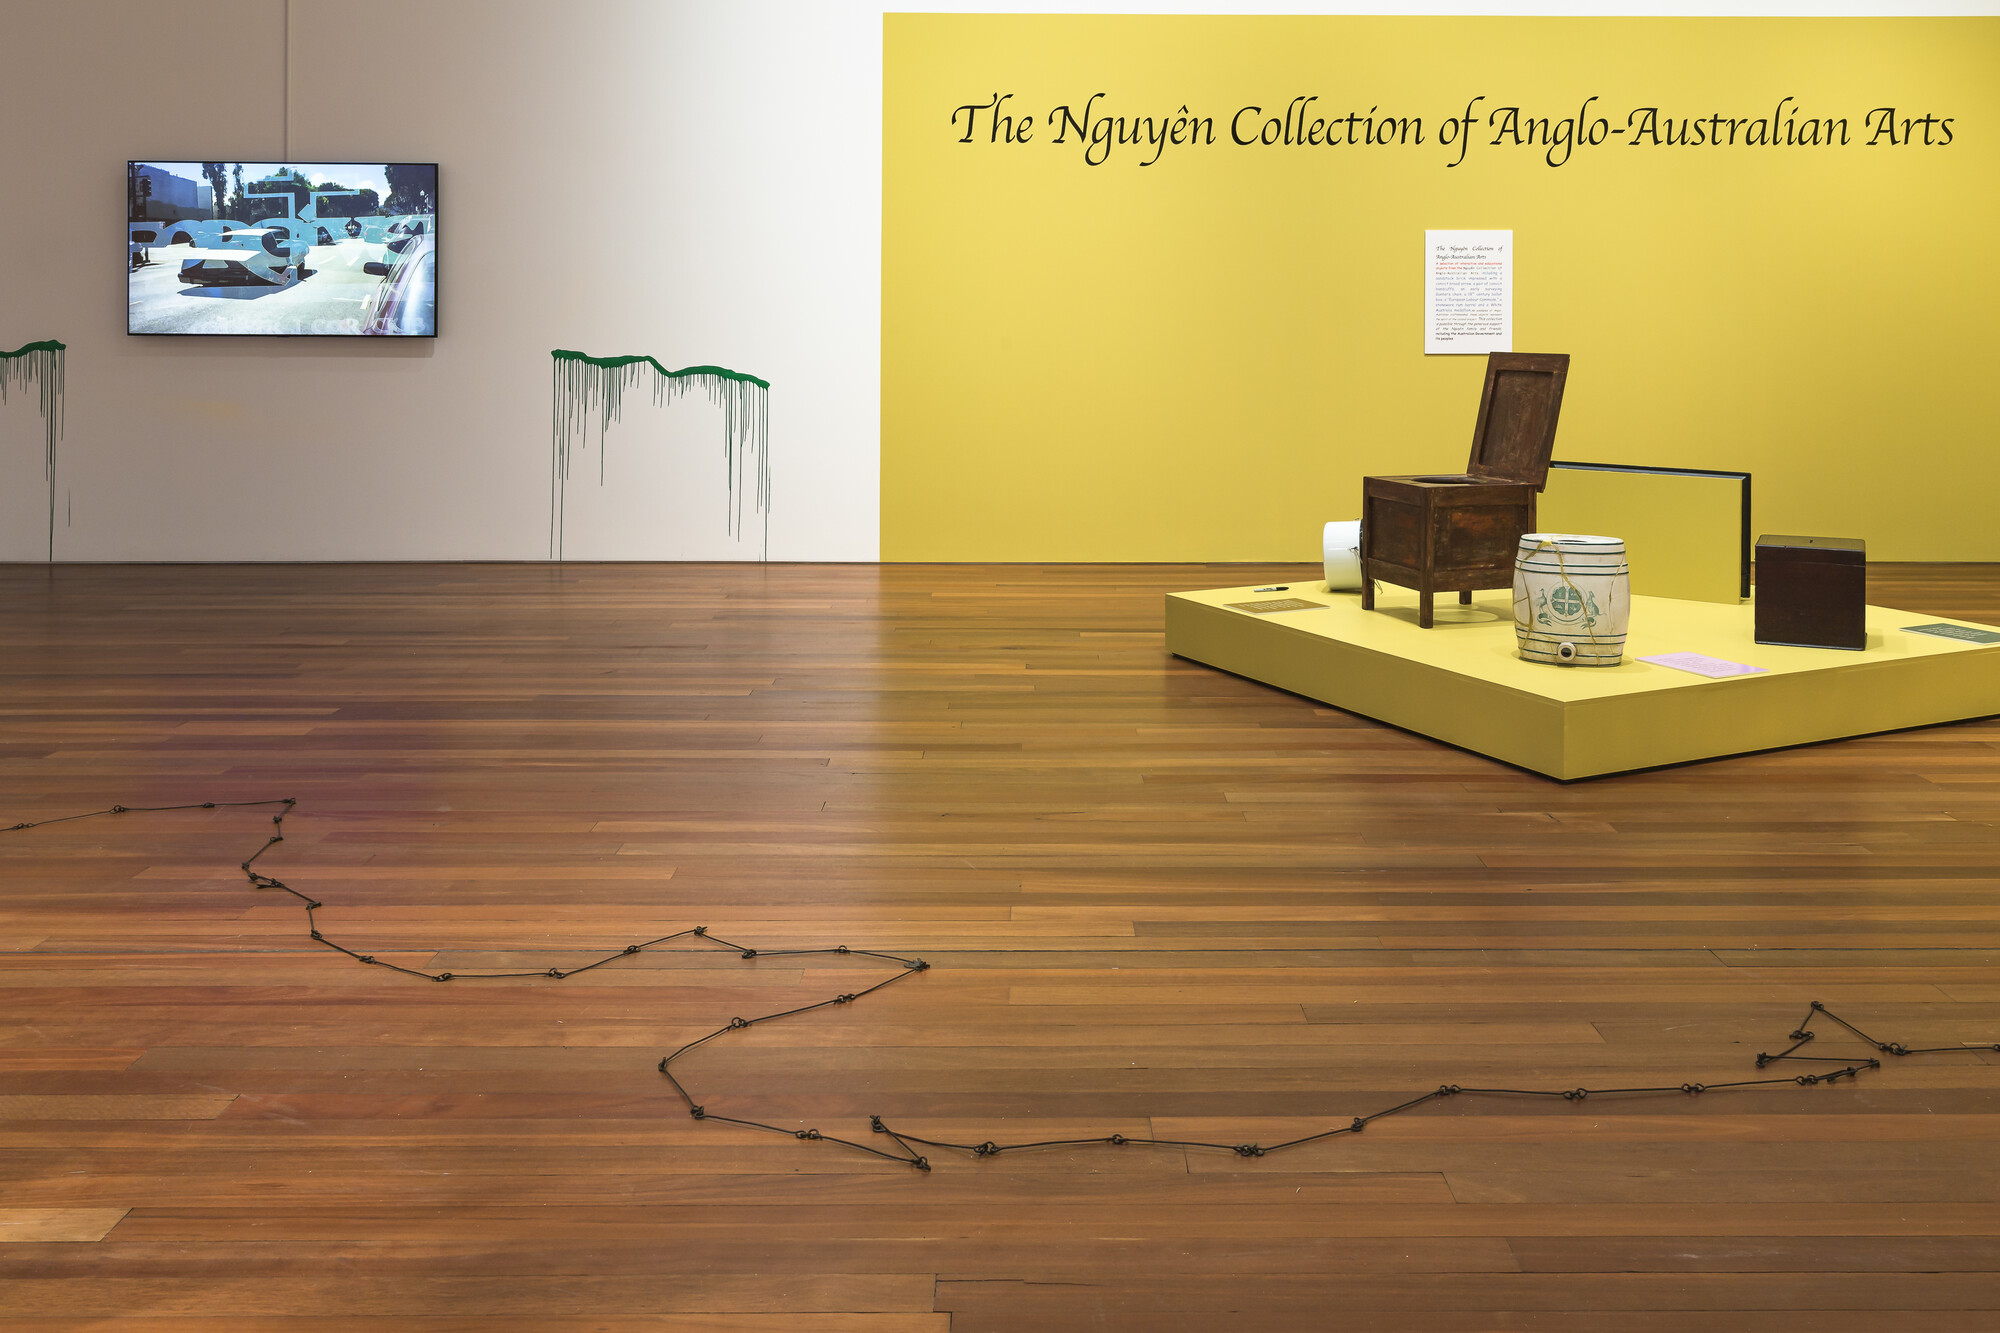 Install view: A park is not a forest, curated by Salote Tawale, Sydney College of the Arts. Right: James Nguyen, T<em>he Nguyễn Collection of Anglo-Australian Arts</em>, 2022. Mixed media. All objects acquired at auction by The Nguyễn Collection of Anglo-Australian Arts. Left: Claudia Nicholson, <em>An Old Spelling of My Name</em>, 2020. Single Channel HD Video (12:32). Sound by James Brown. This artwork was made with the support of Urban Theatre Projects.  Photo: Document Photography